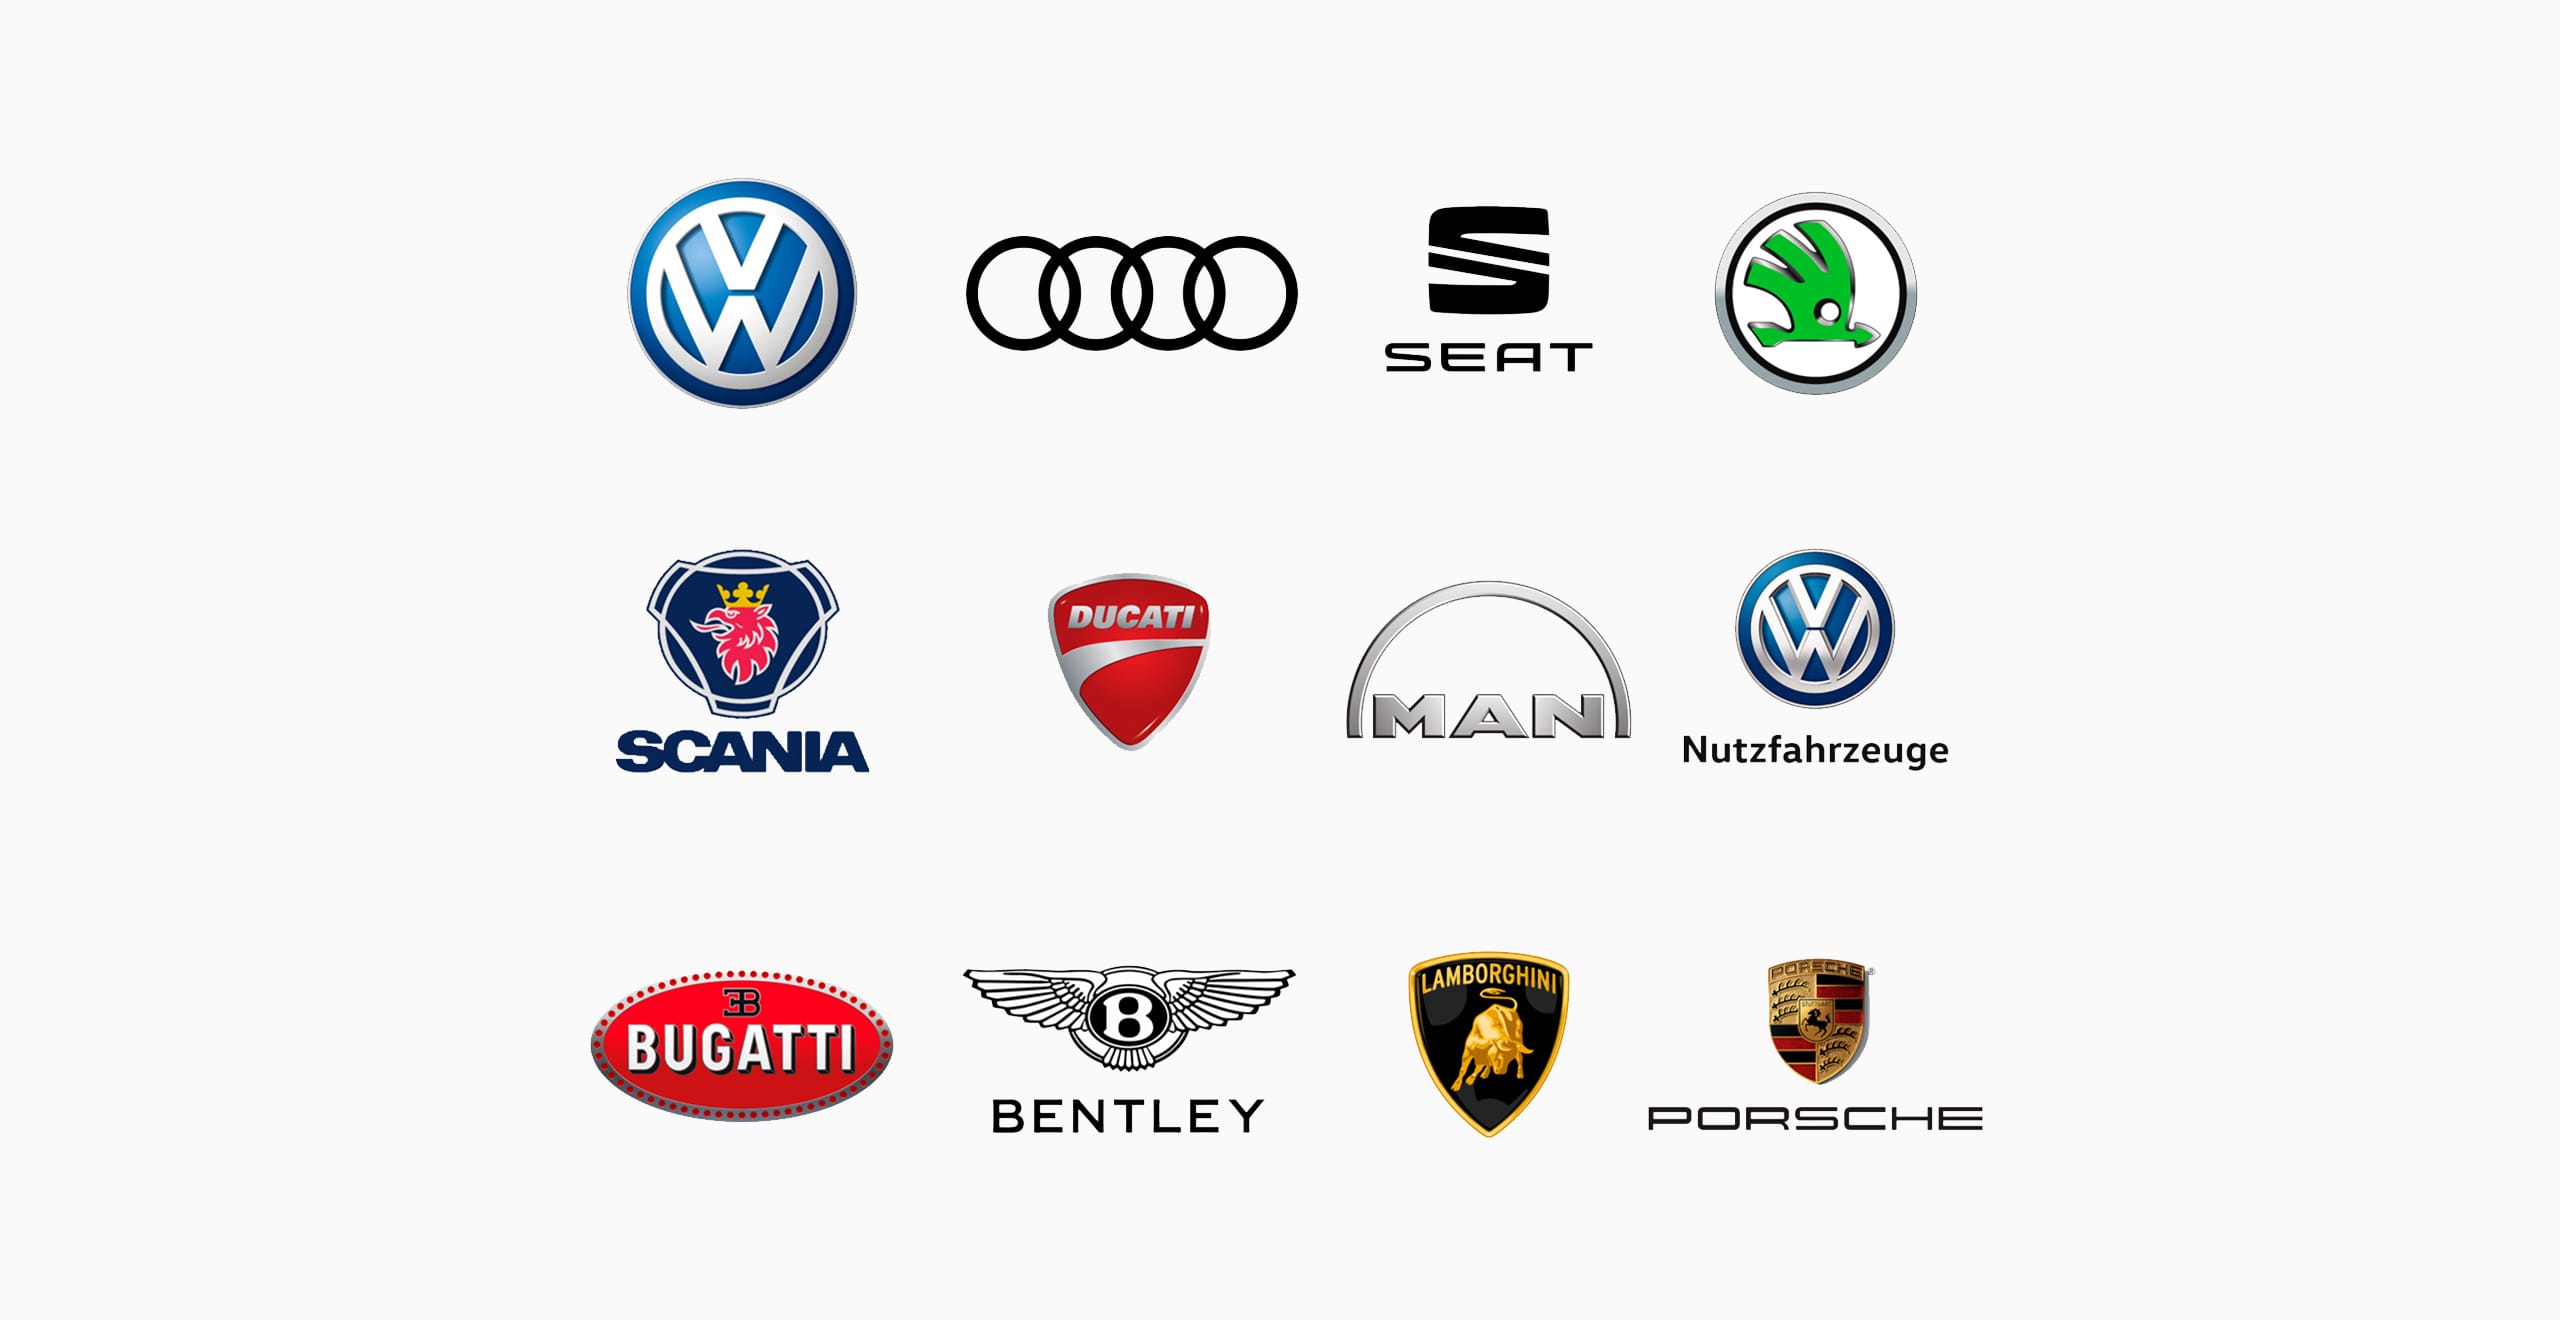 > Opprtunities available logos of companies in the Volkswagen Group – SEAT Human Resources